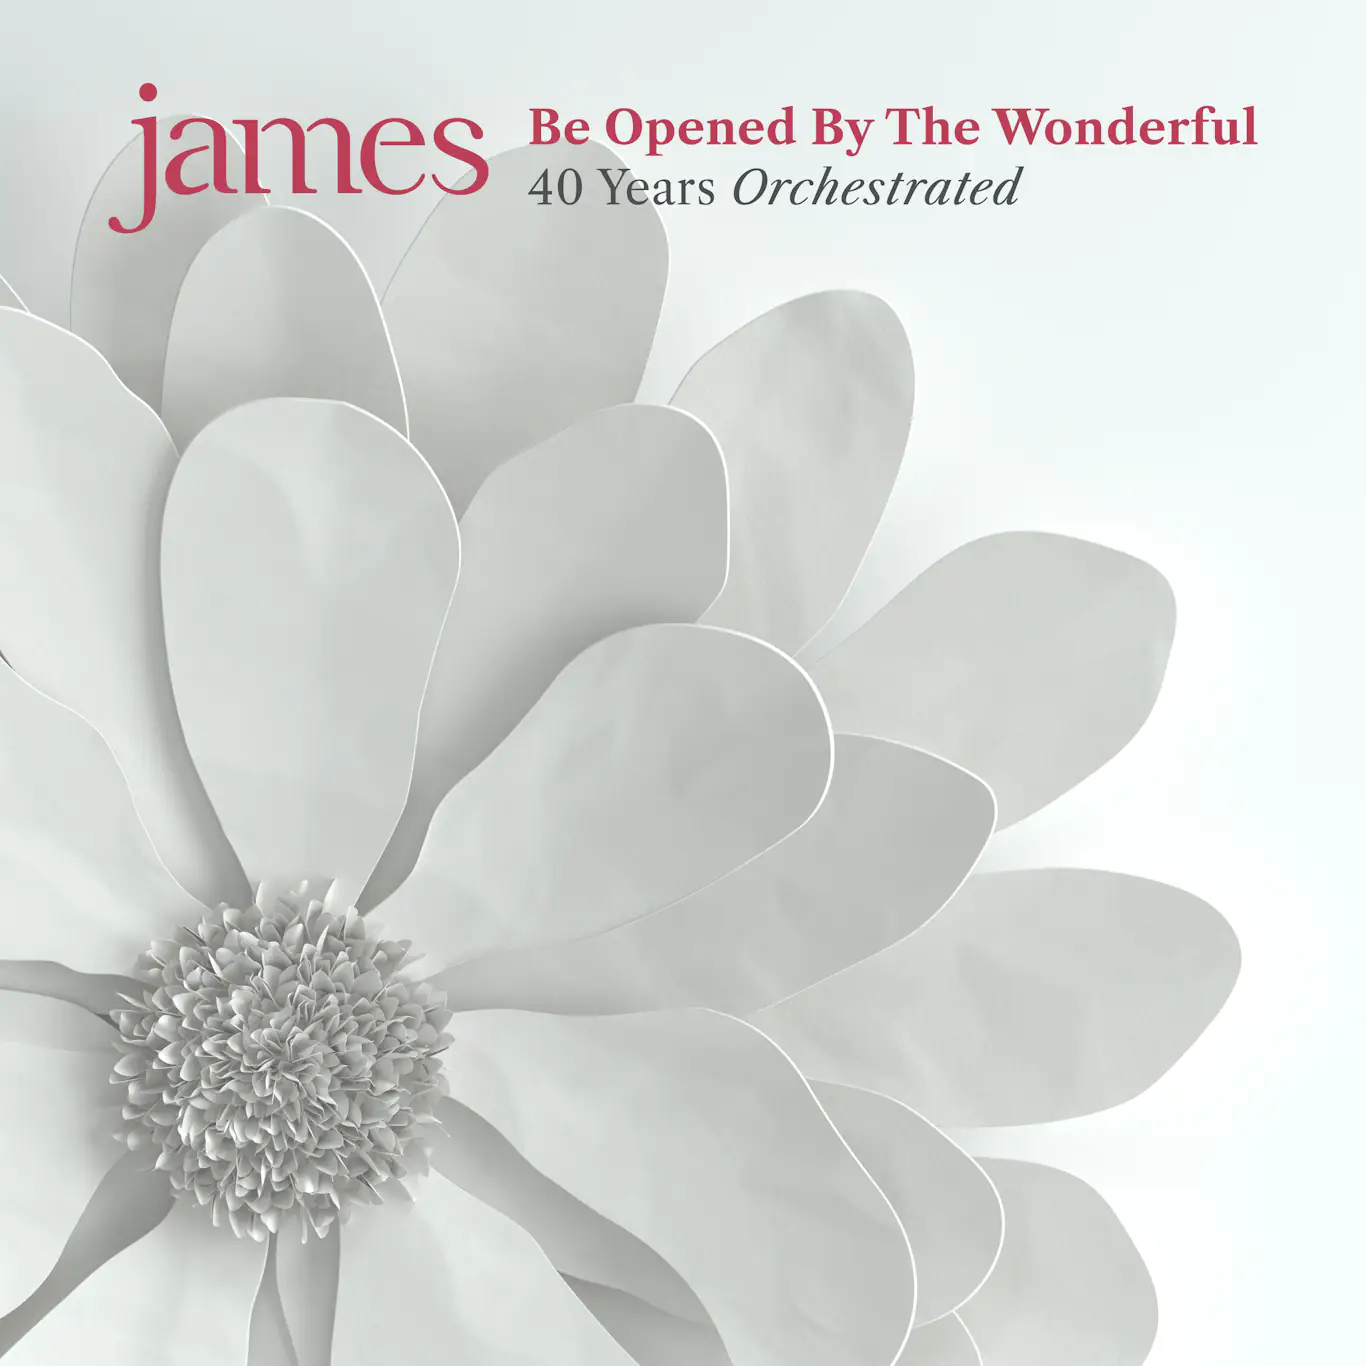 ALBUM REVIEW: James – Be Opened By The Wonderful